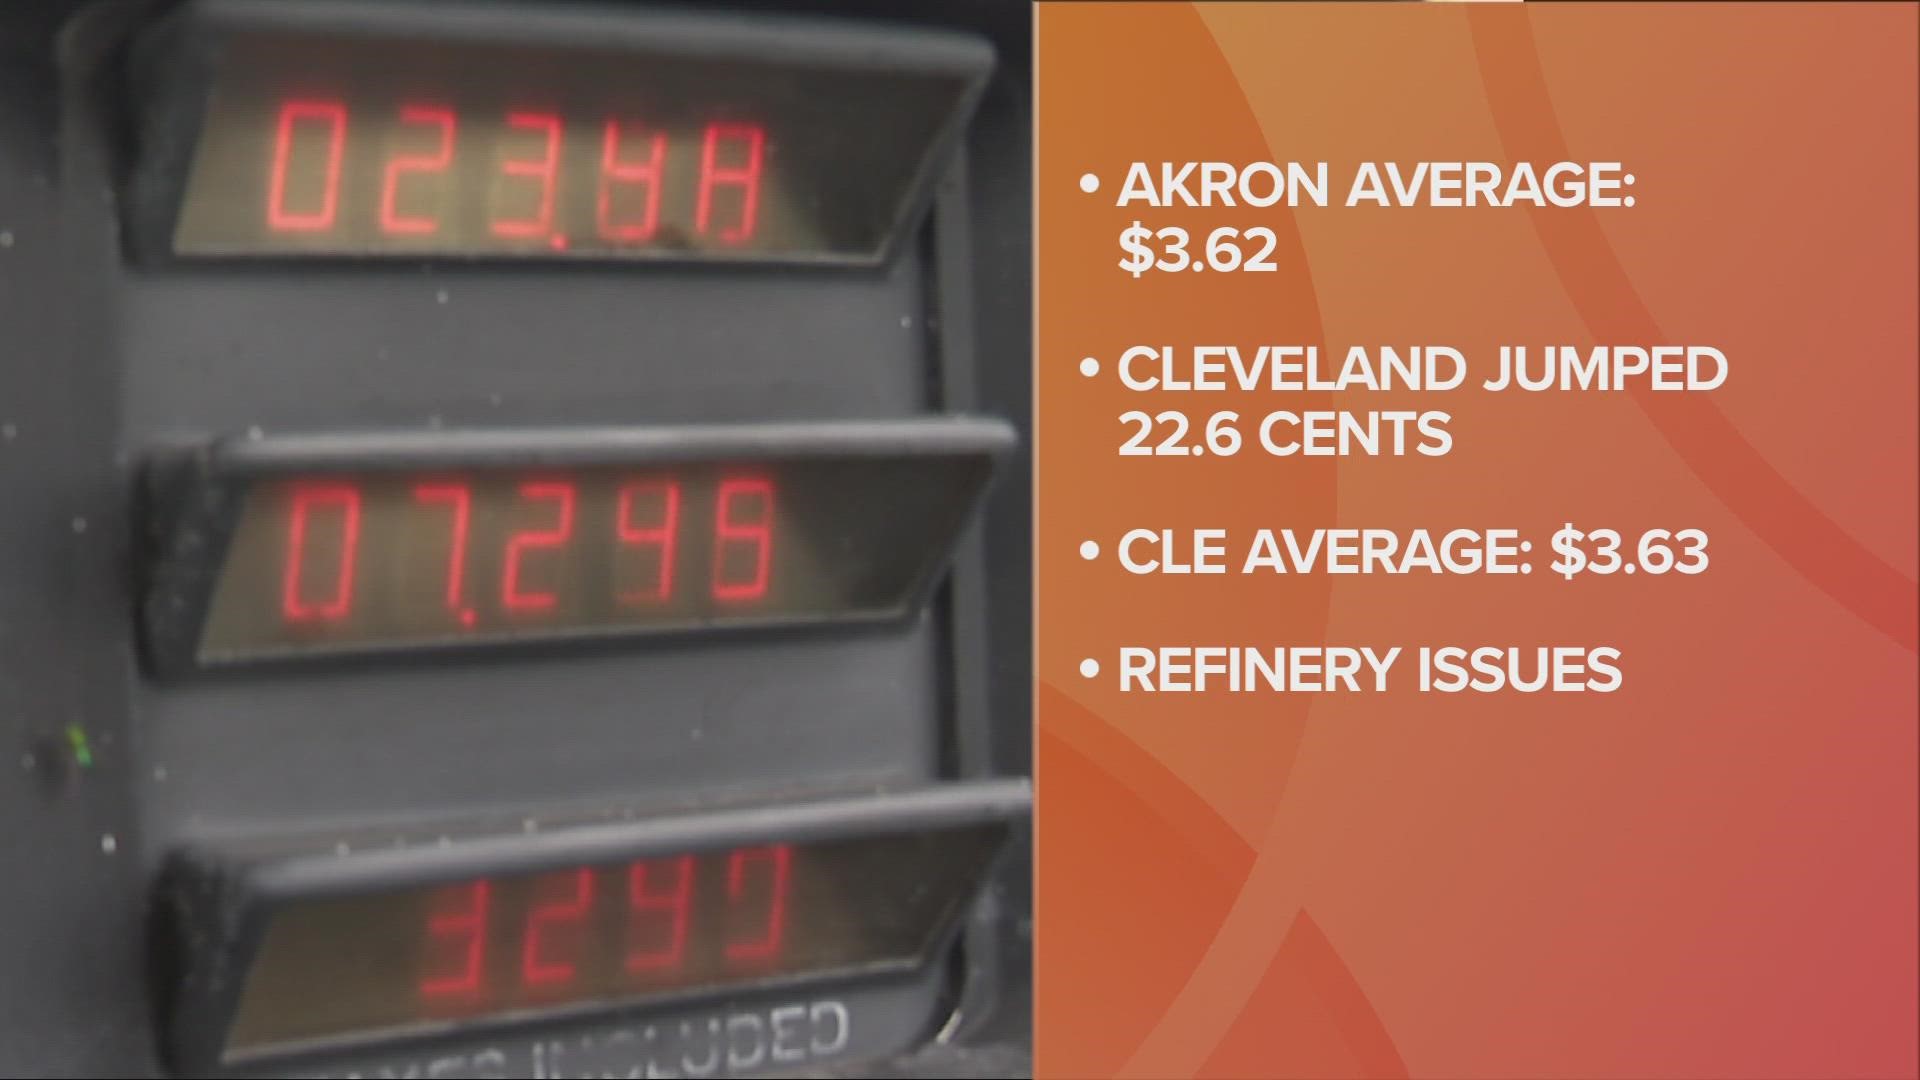 The average price for a gallon of gas is now topping $3.60 in both Akron and Cleveland.